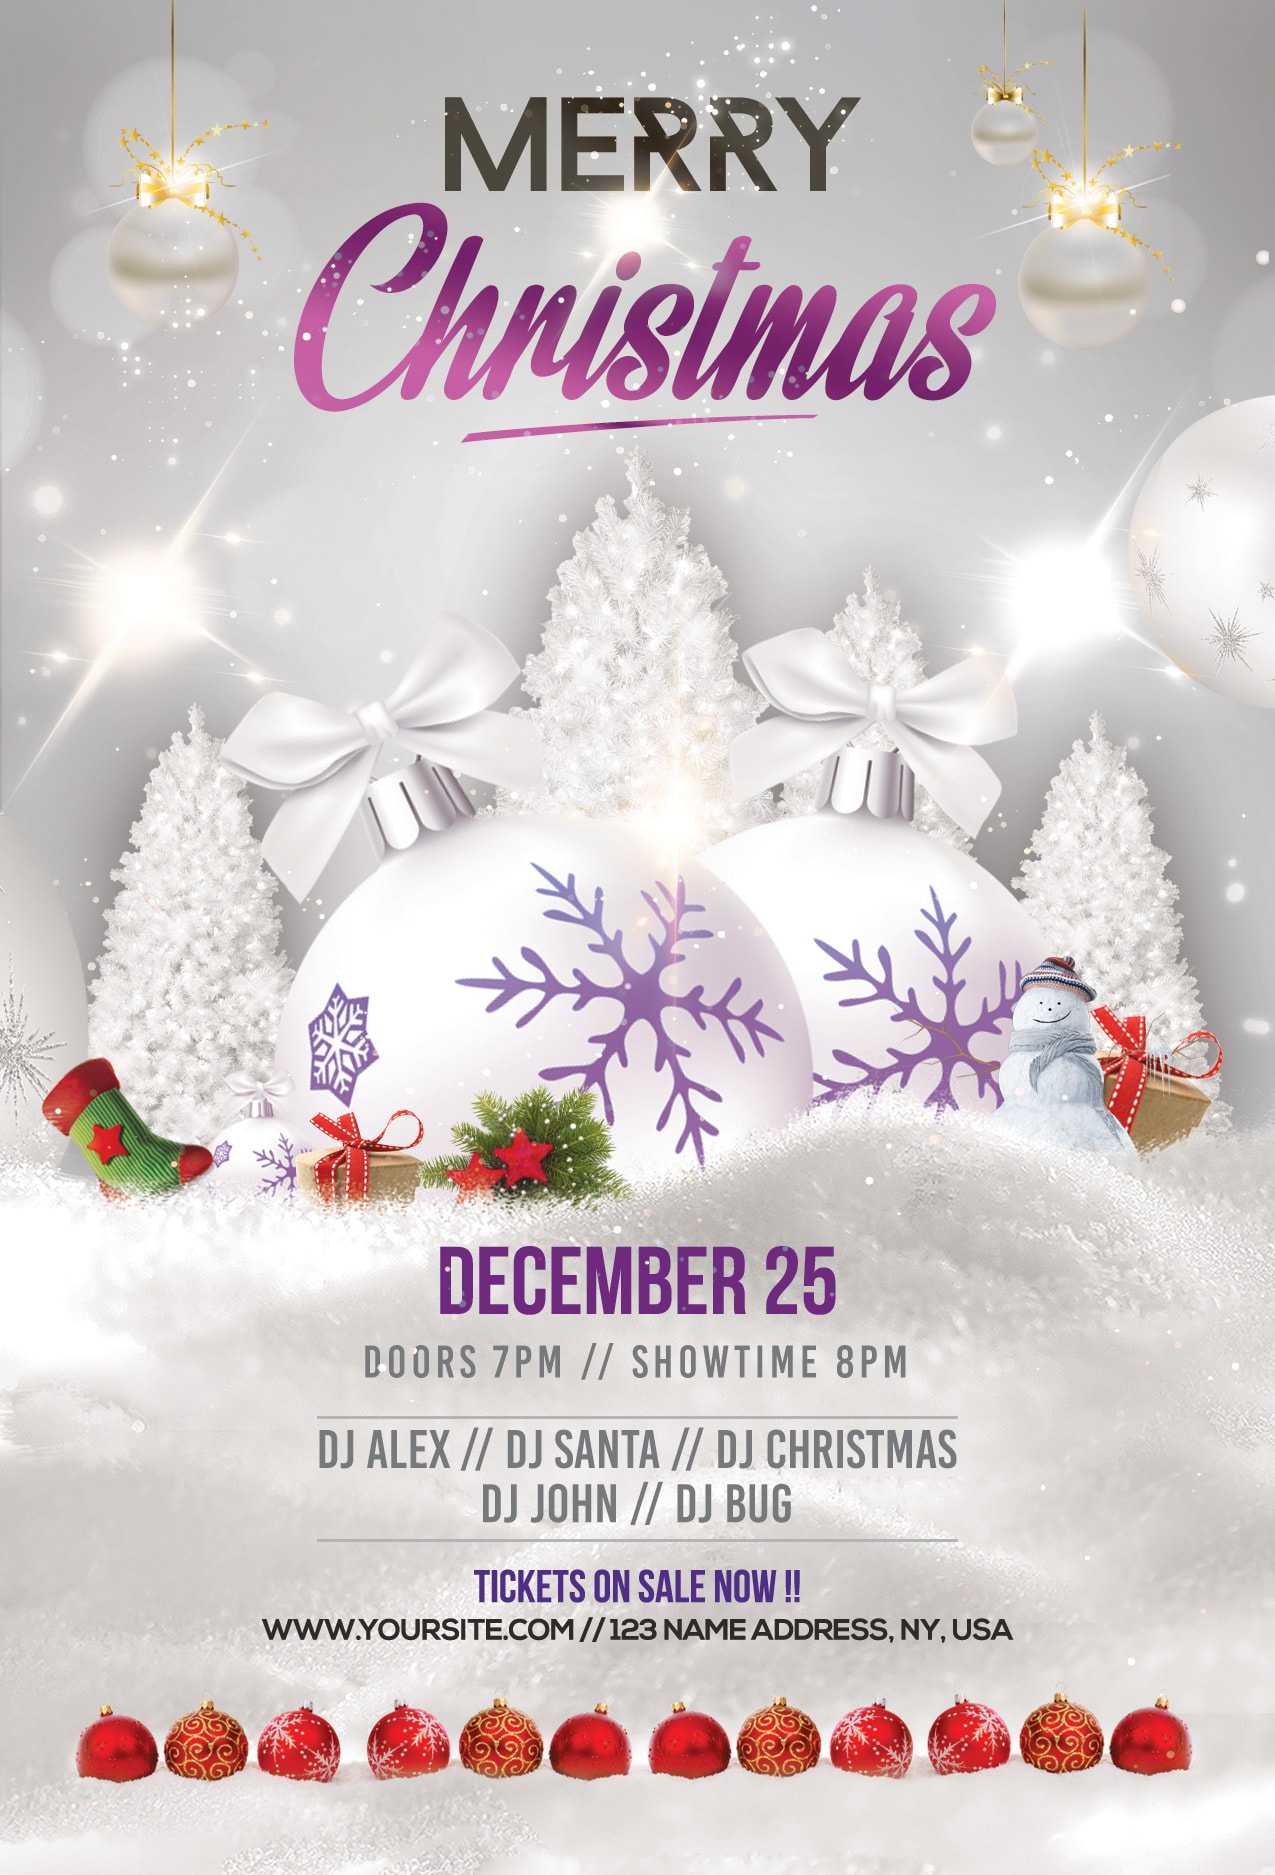 Merry Christmas & Holiday Free Psd Flyer Template – Stockpsd Intended For Christmas Brochure Templates Free